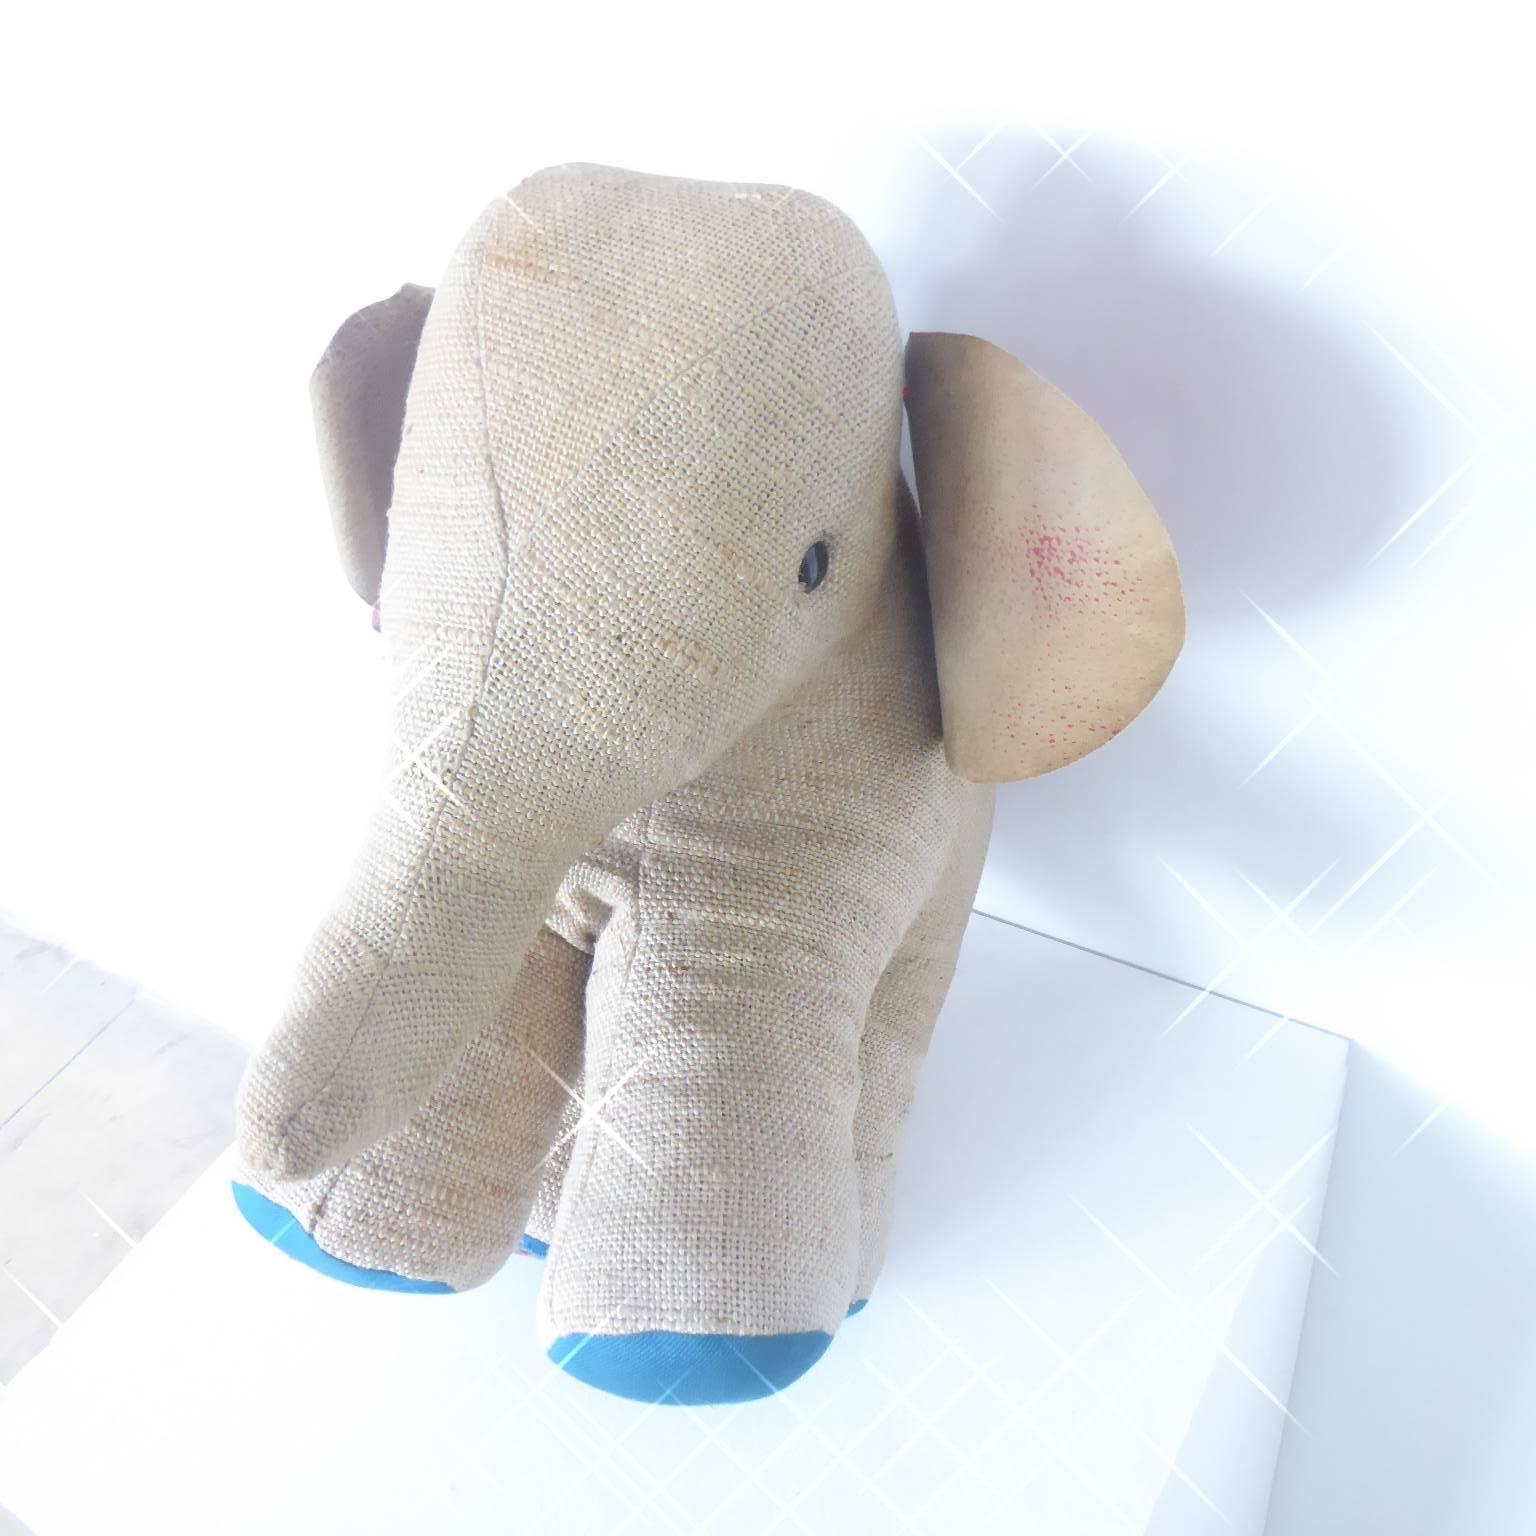 Vintage Elephant Therapeutic Toy by Renate Müller 1